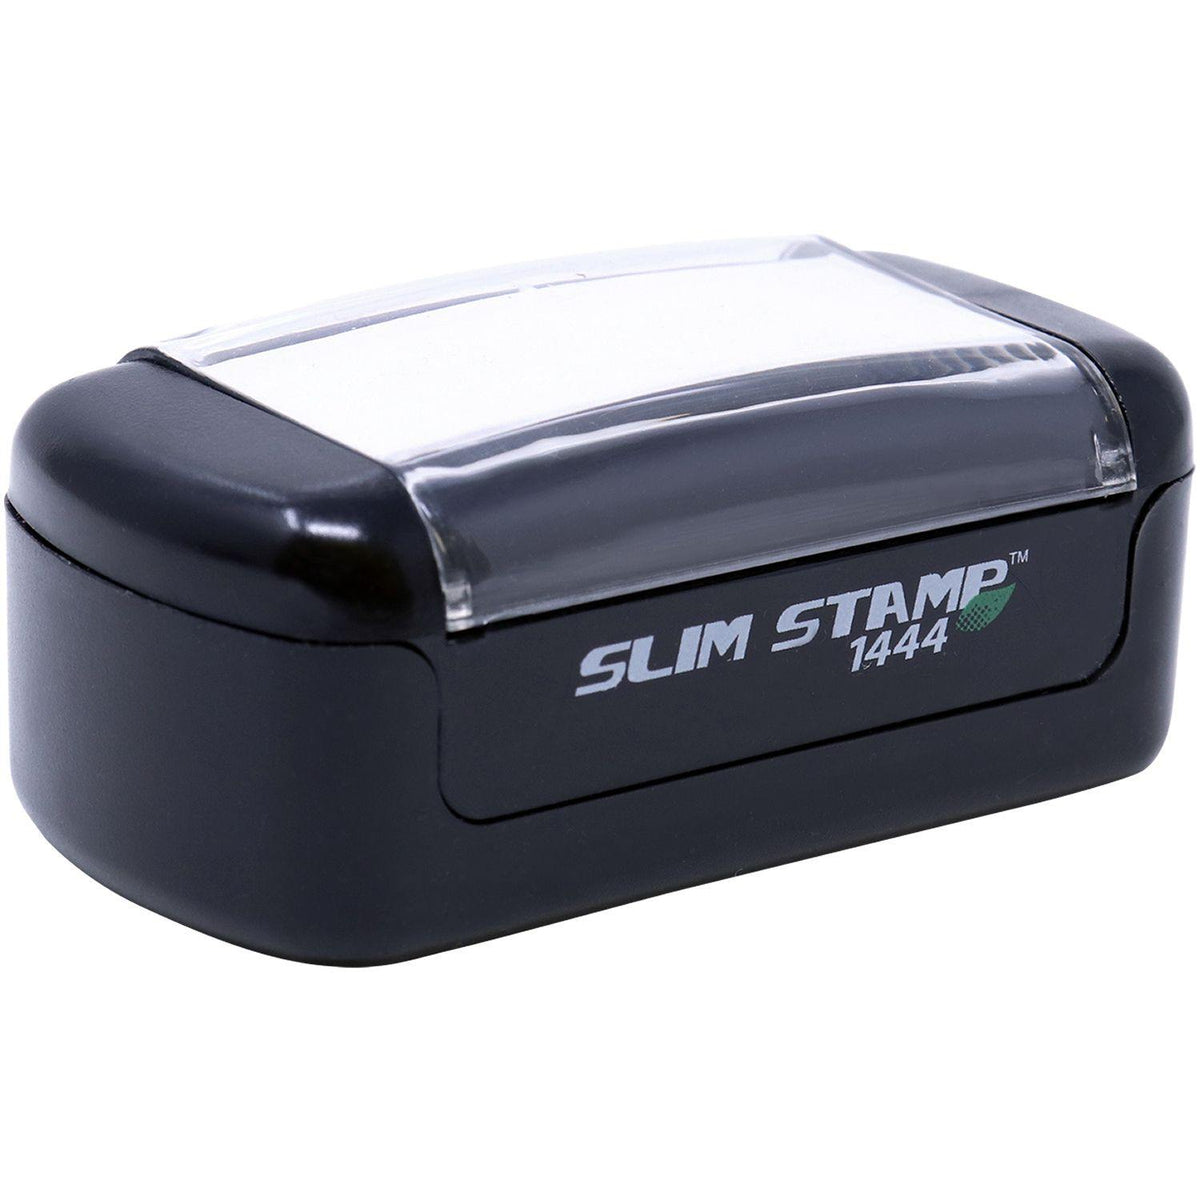 Alt View of Slim Pre-Inked Expreso Stamp Mount Angle